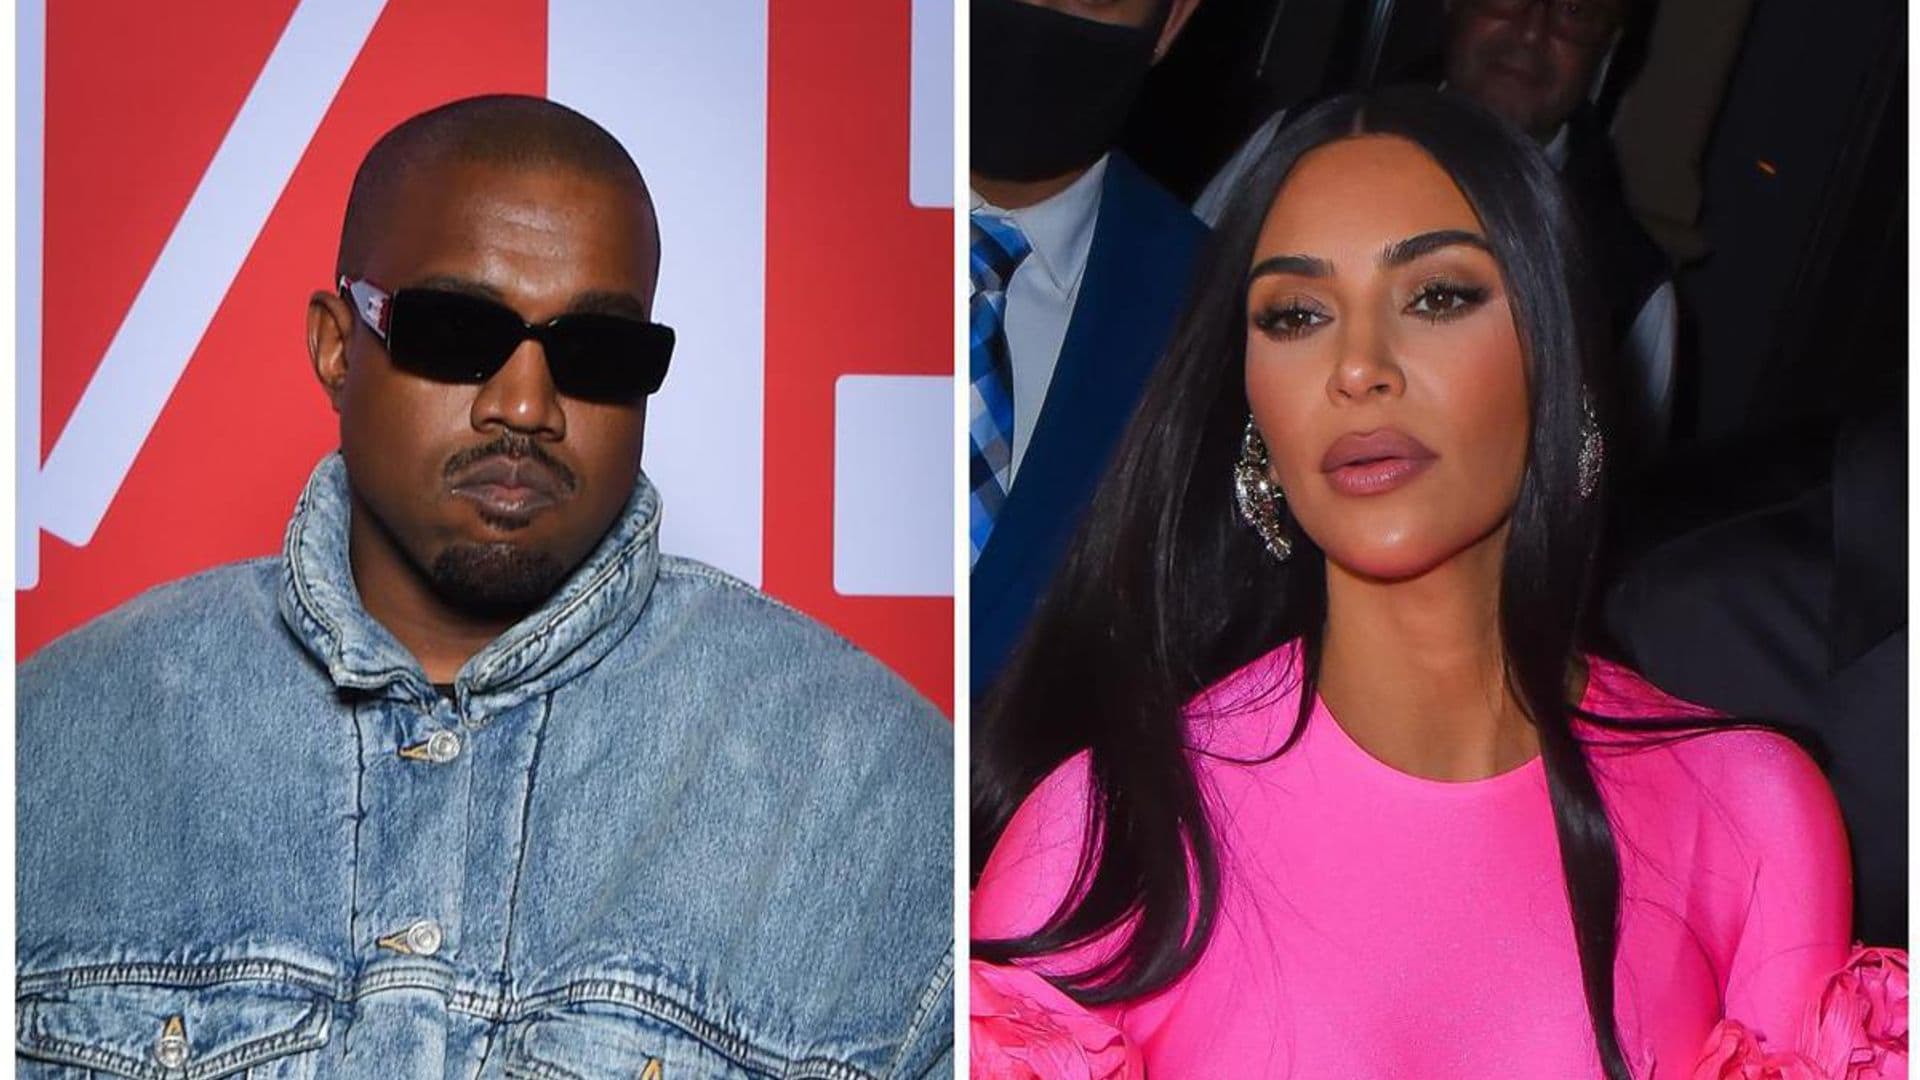 Kanye West calls out Kim Kardashian for allowing North West to use social media, and she replies